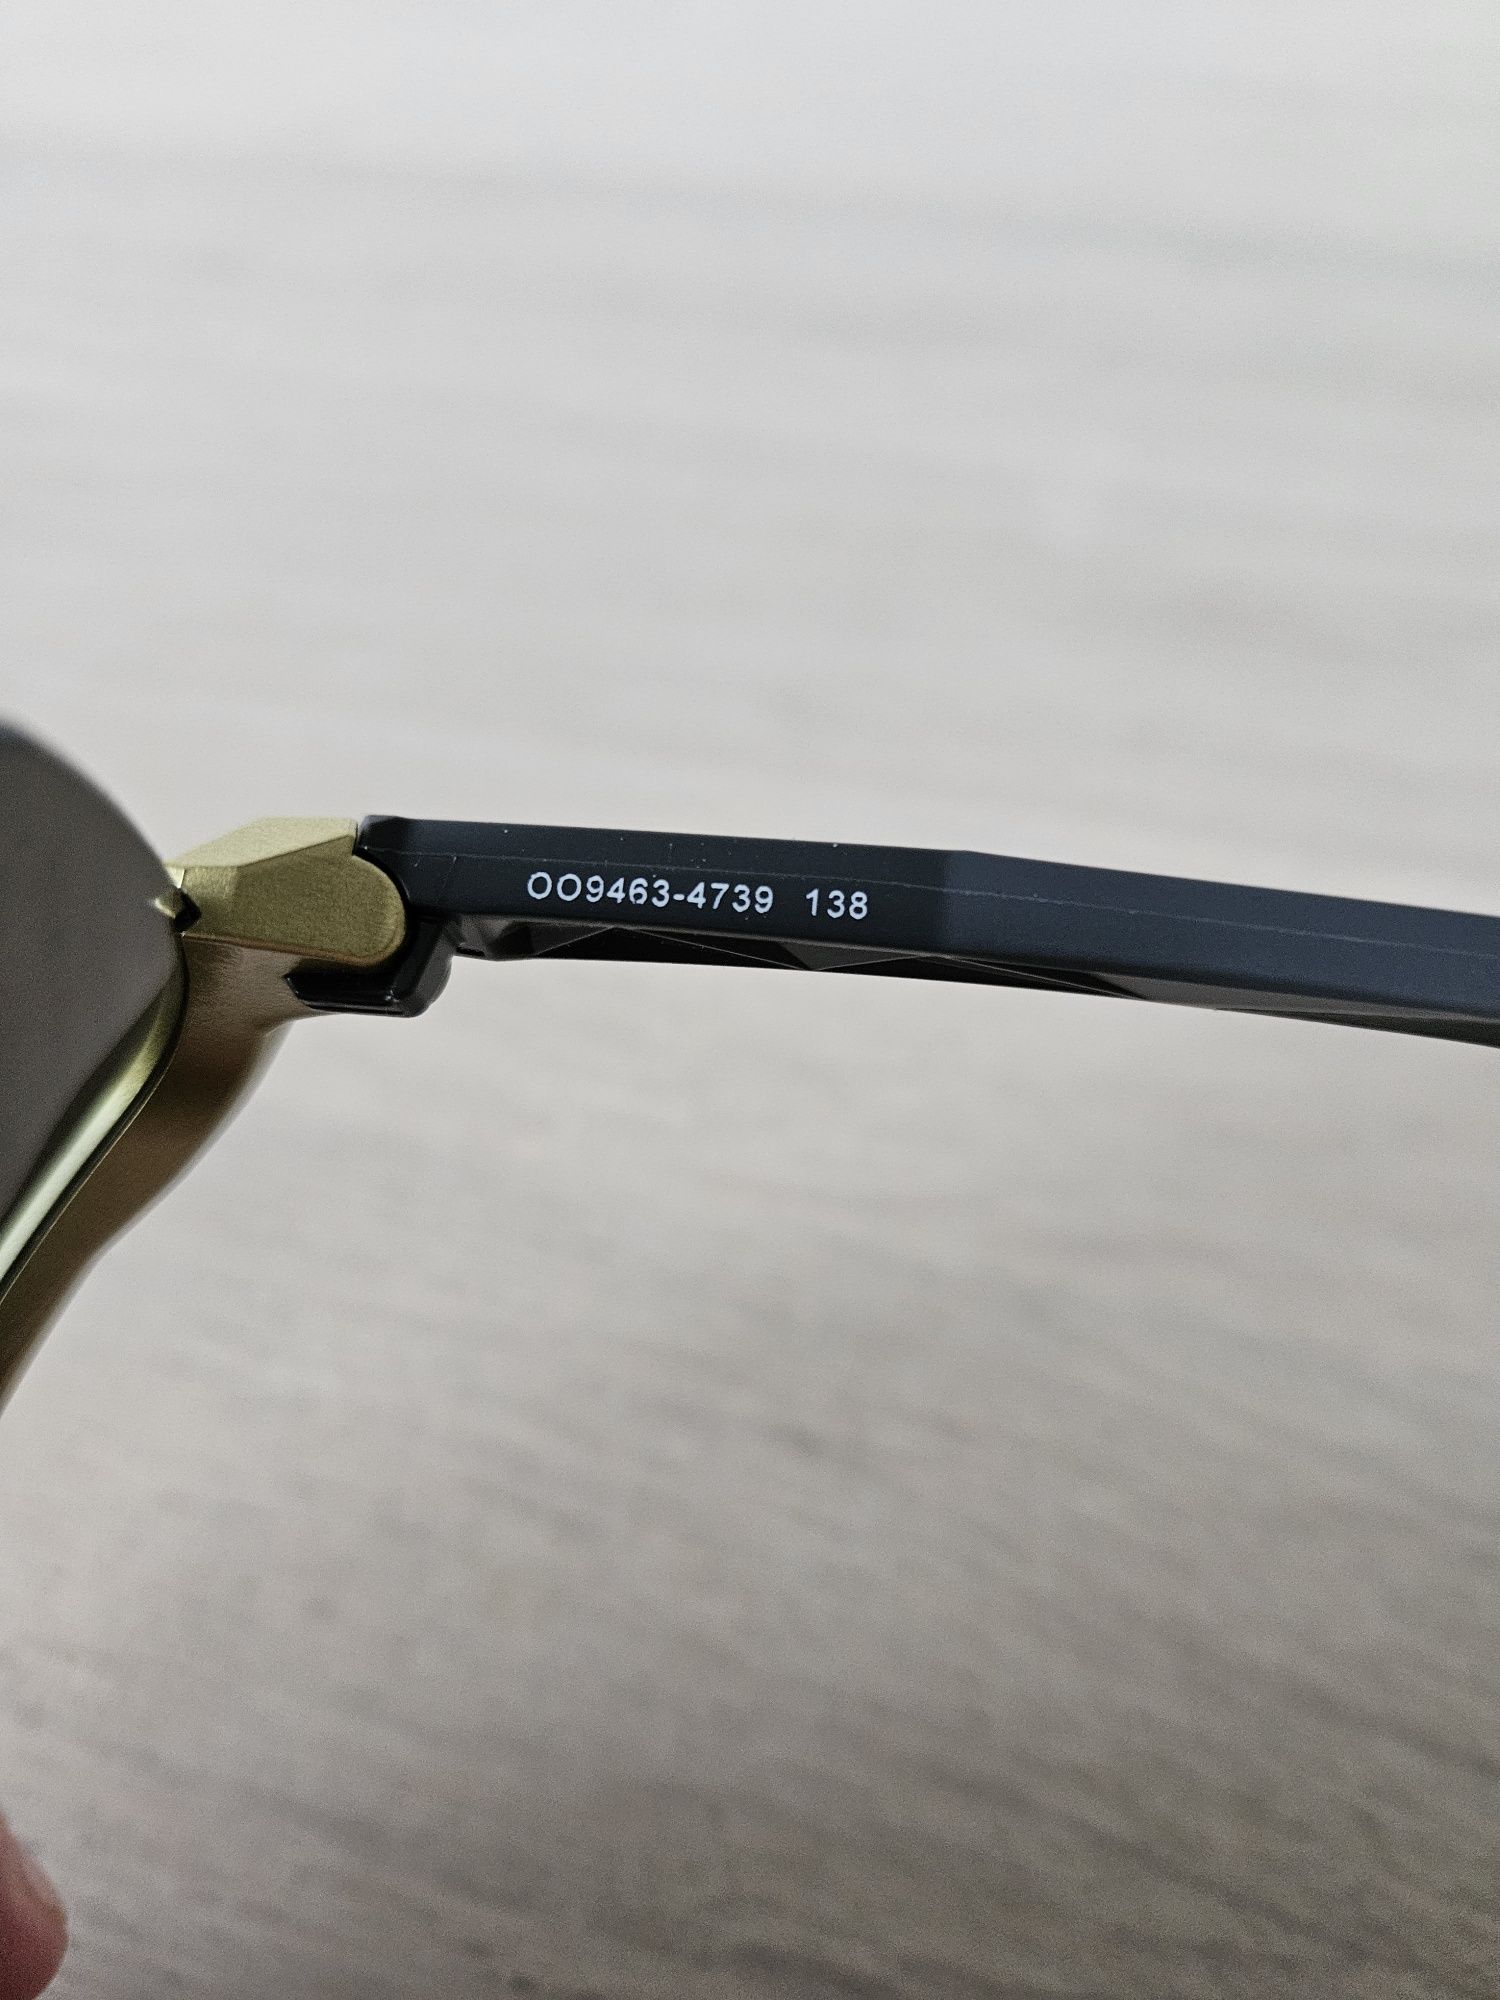 Oakley sutro lite olympic gold prizm black Limeted Edition